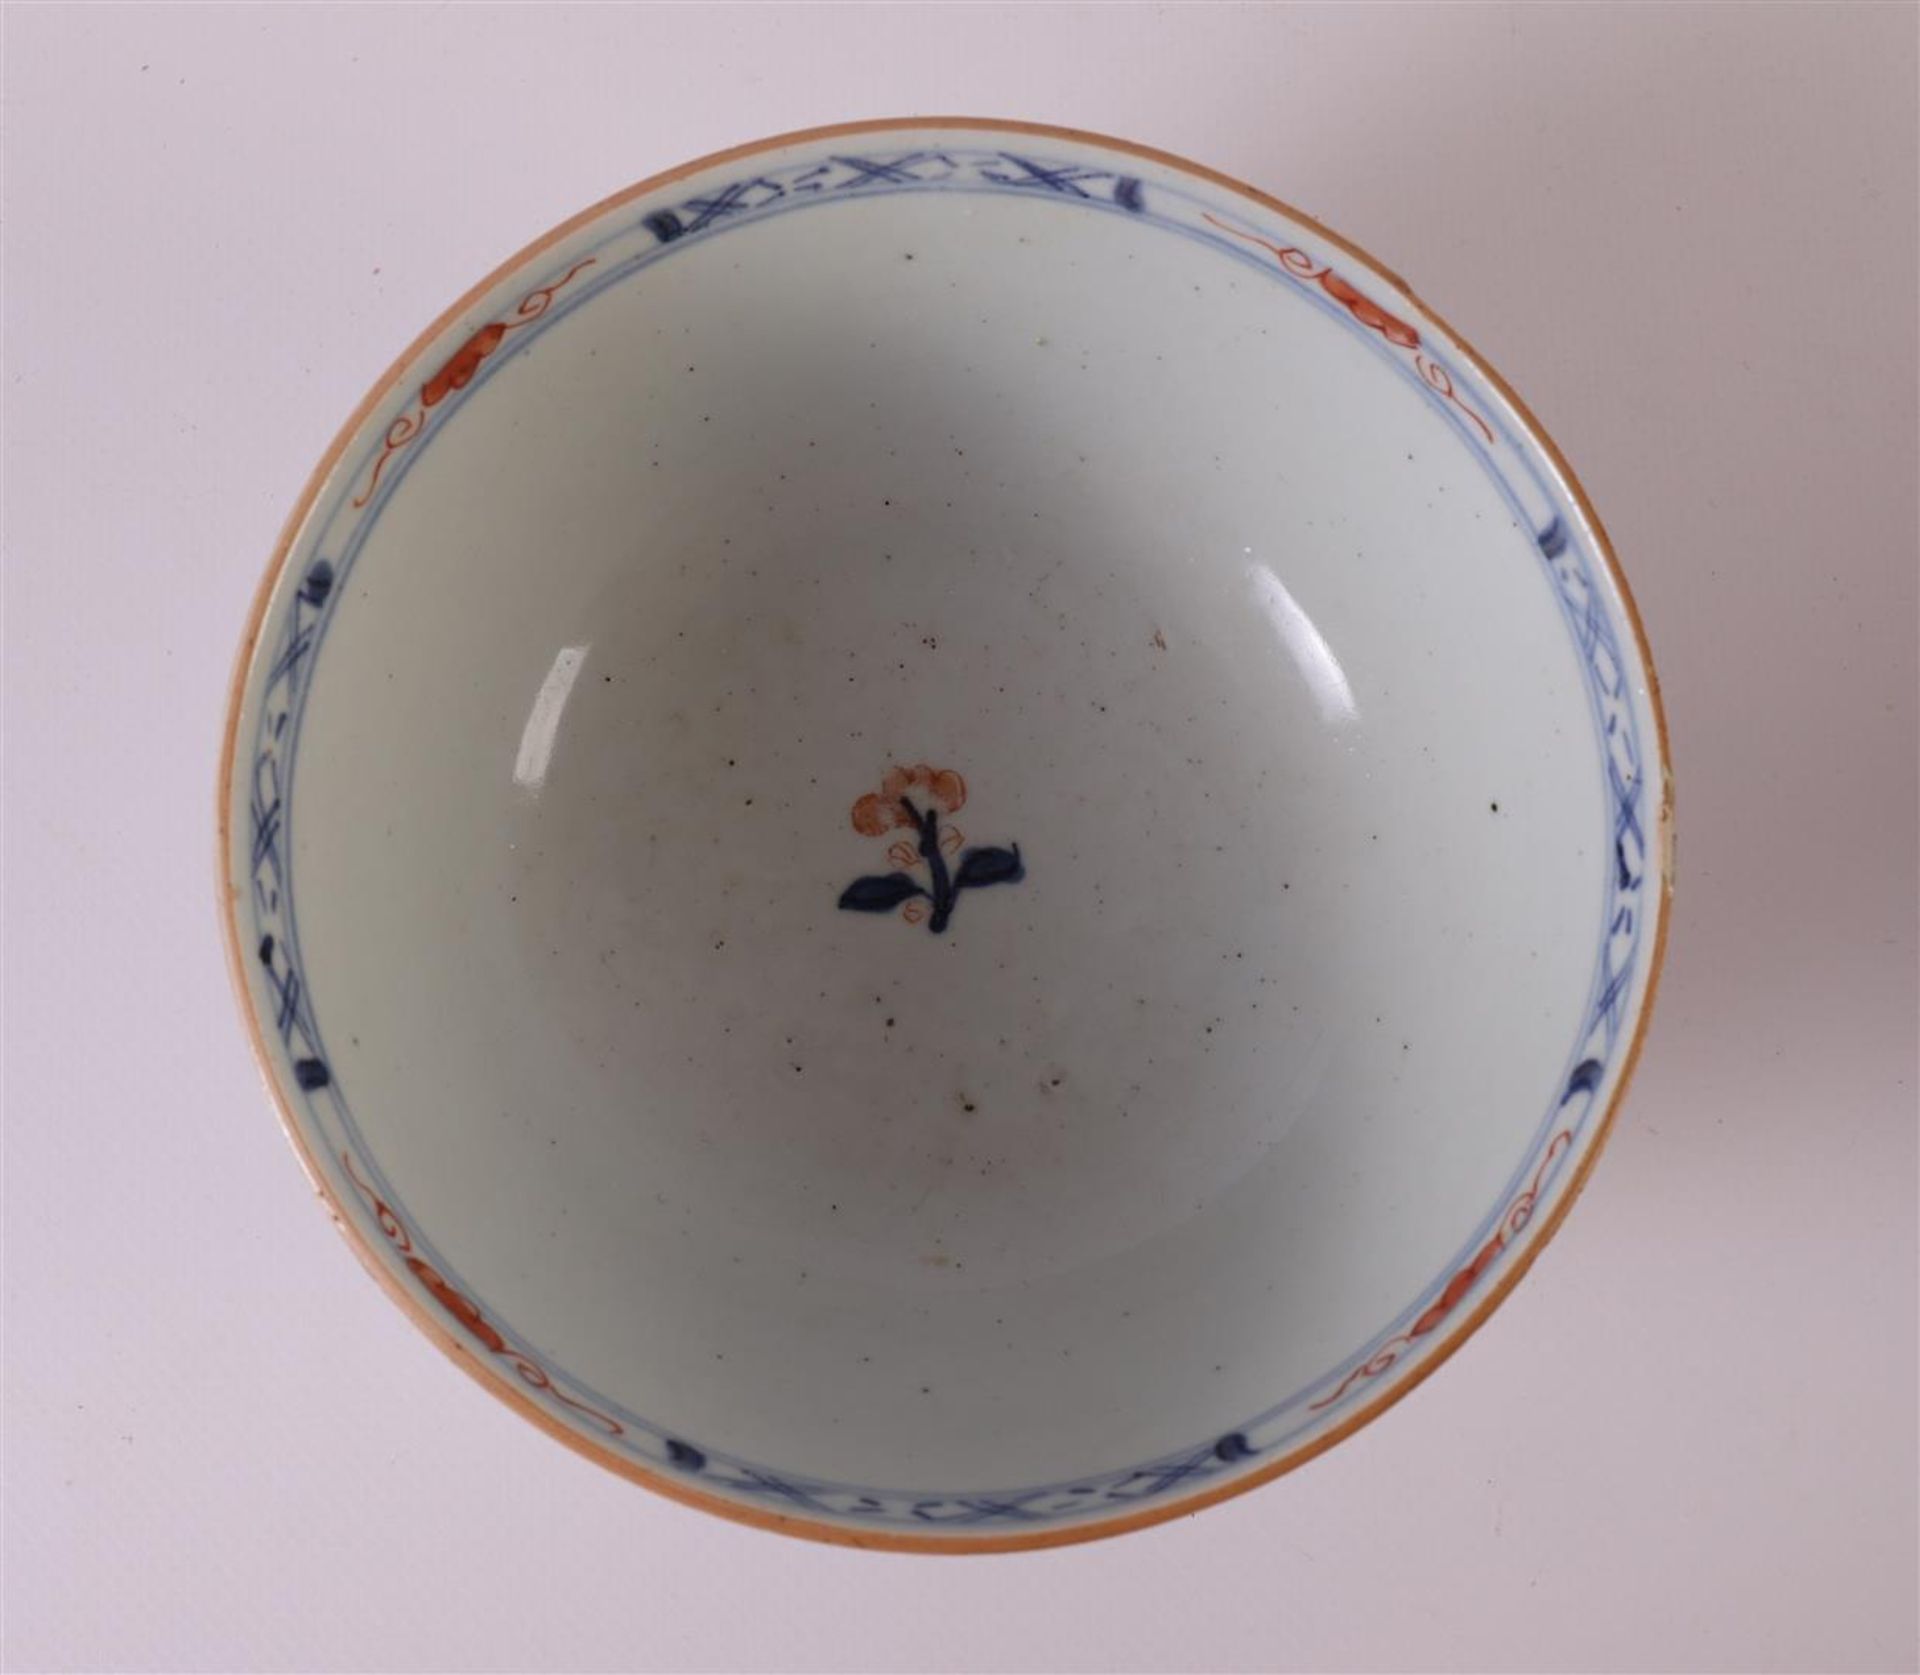 A set of porcelain Chinese Imari bowls on a stand, China, Qianlong, 18th century. Blue/red, partly - Image 9 of 10